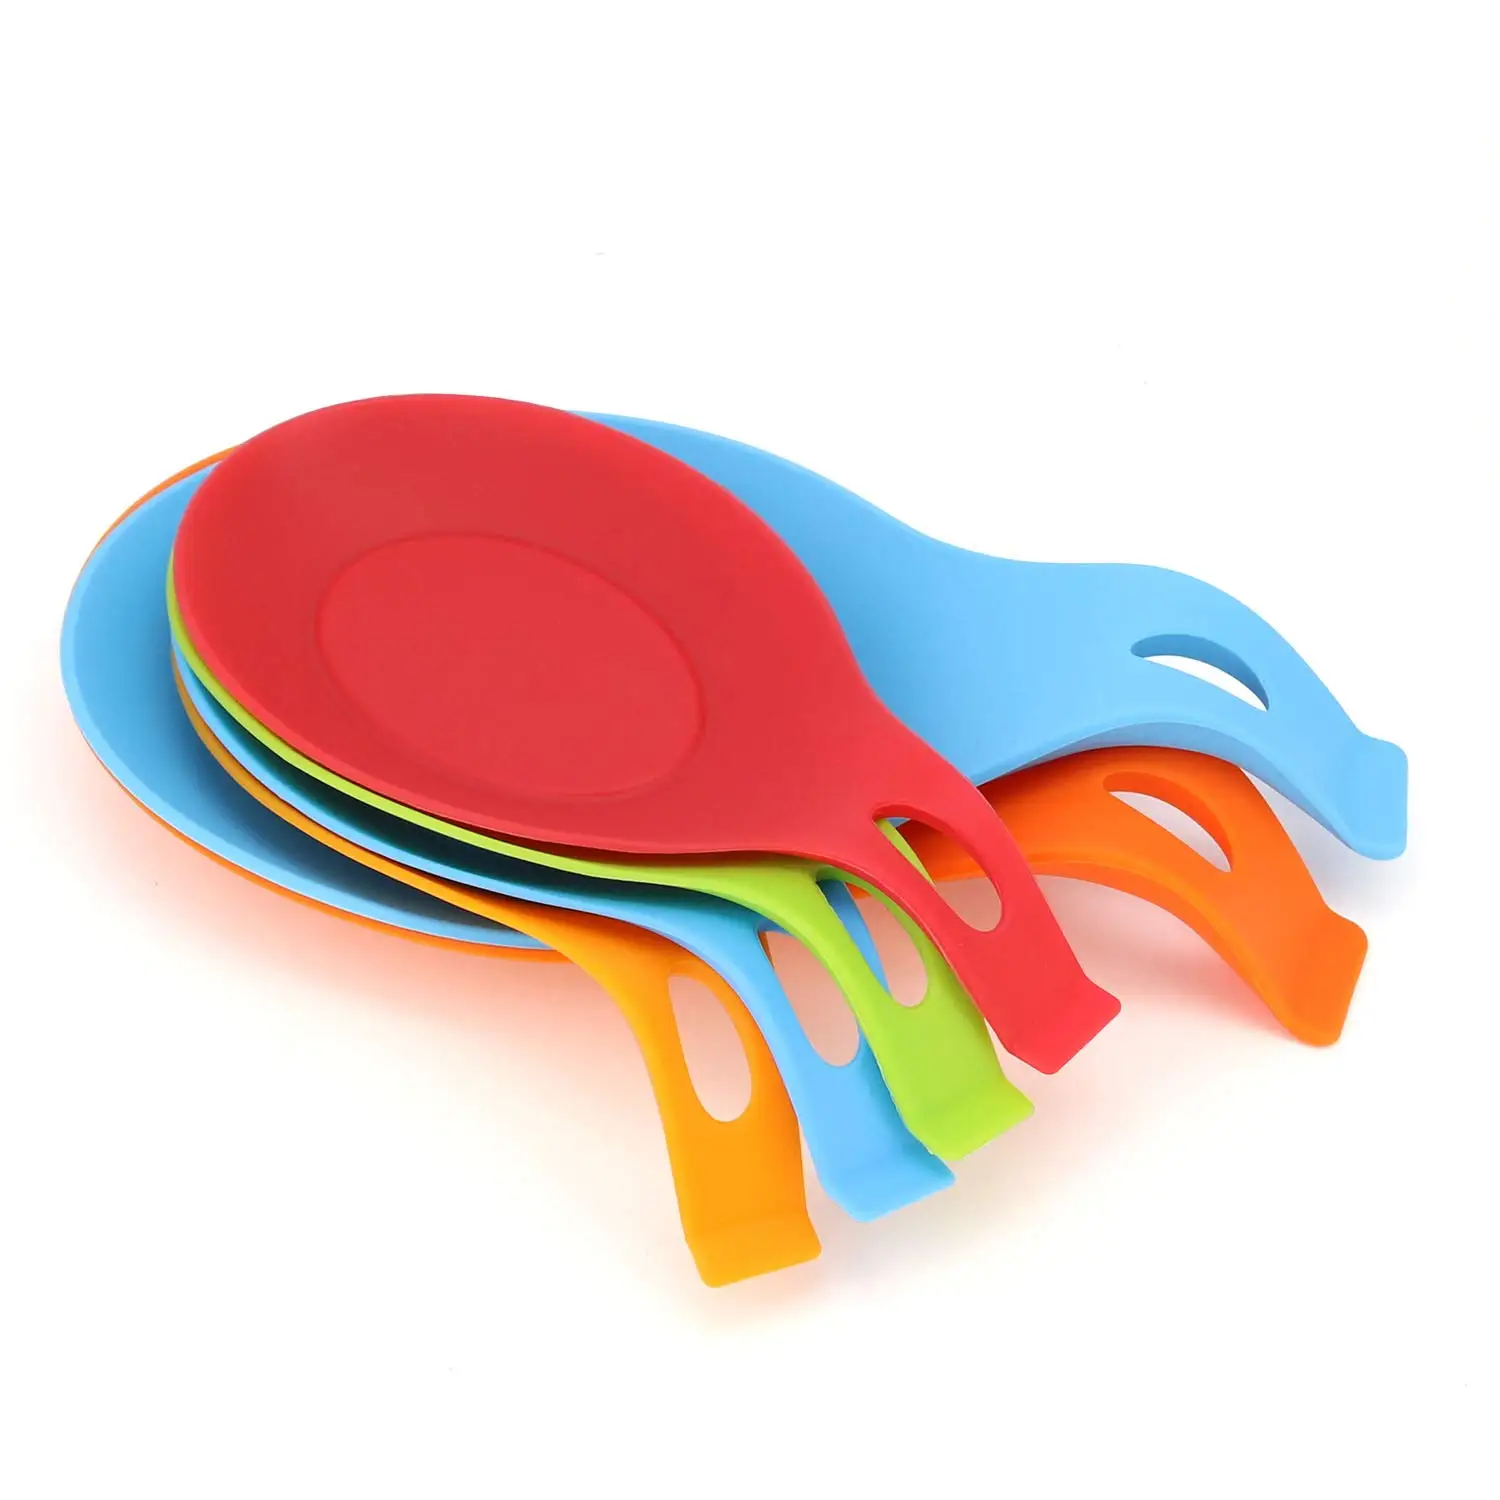 Yongli Food Grade Silicone Spoon Holder Utensil Rest Silicone Grey Color Drip Pad Rests & Pot Clips